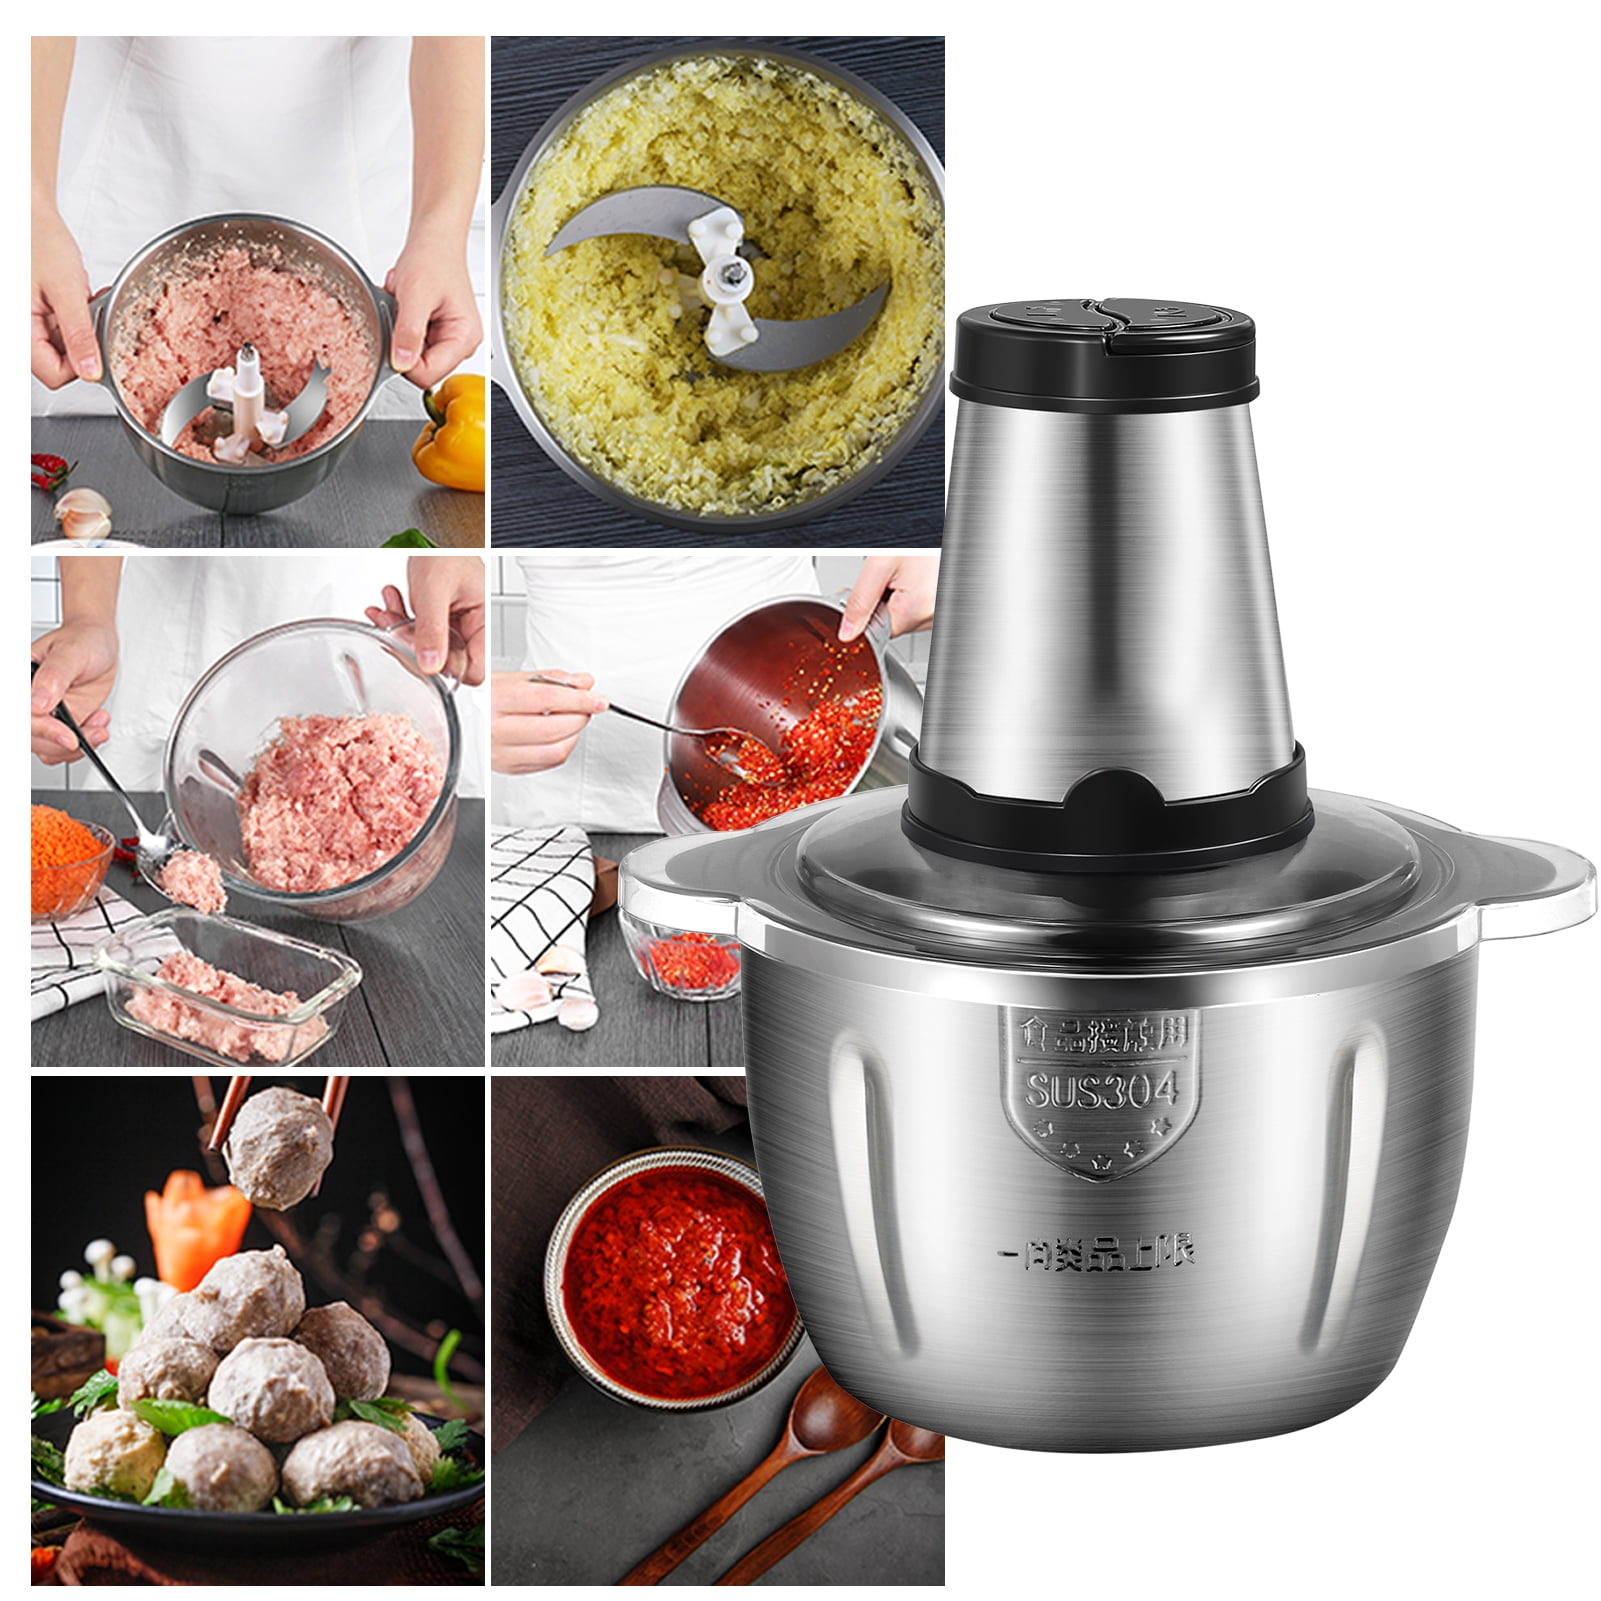 Telcuisine Meat Grinders for Home Use, 2L Electric Food Processors  Stainless Steel Meat Chopper with Egg Whisk for Meat, Vegetables, Fruits  and Nuts